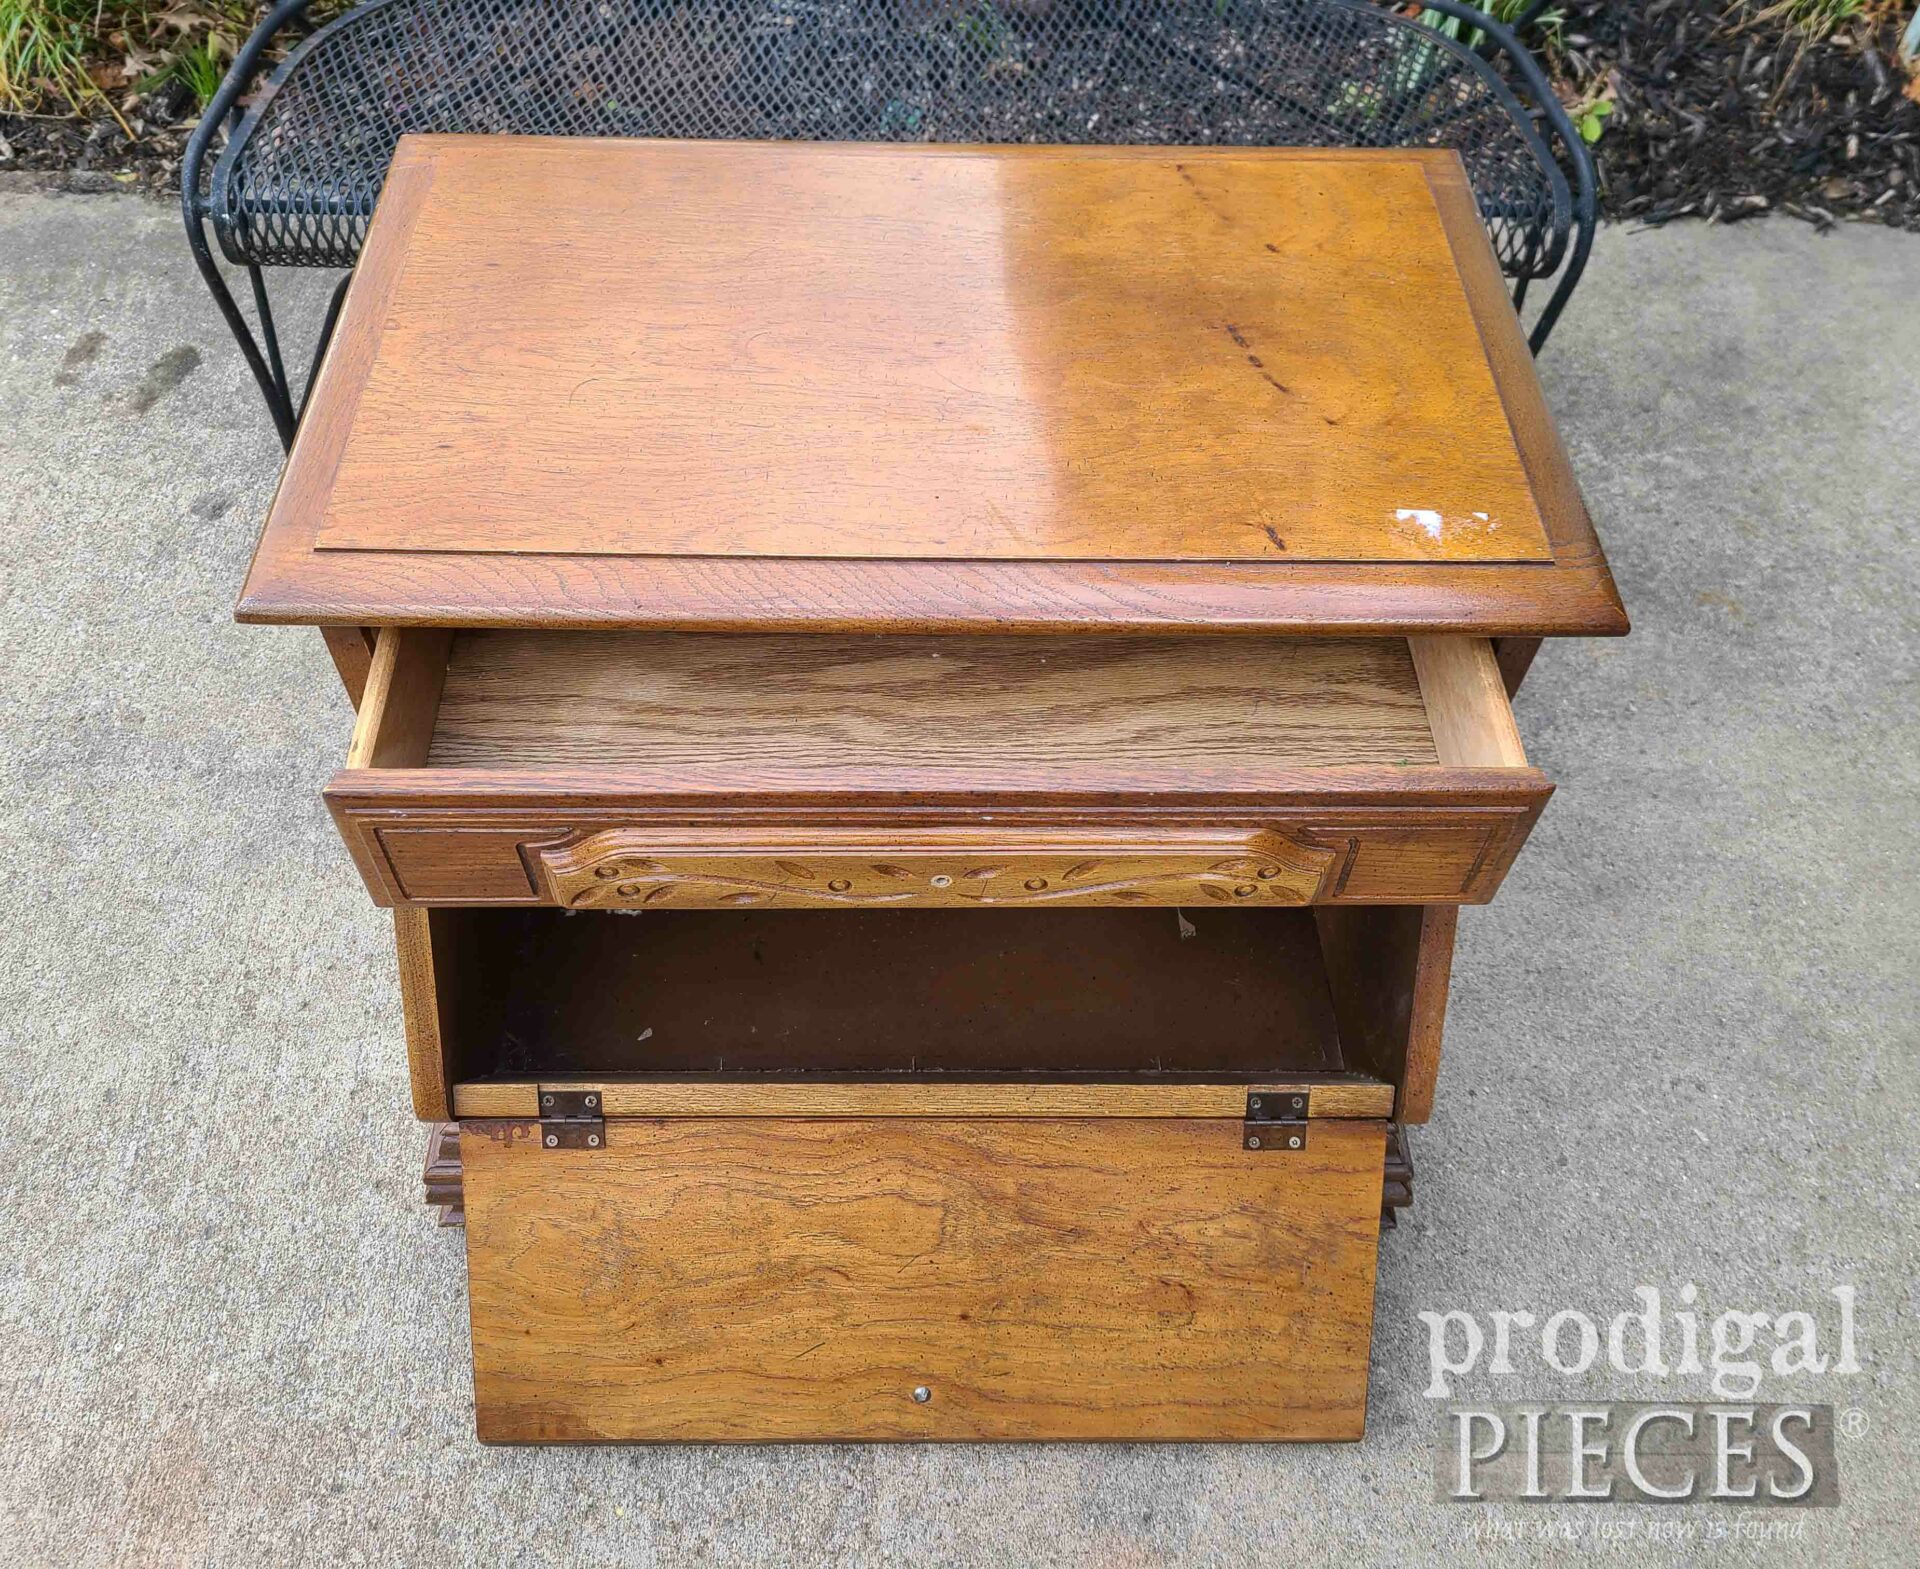 Vintage Open Chest Nightstand Before Makeover by Larissa of Prodigal Pieces | prodigalpieces.com #prodigalpieces